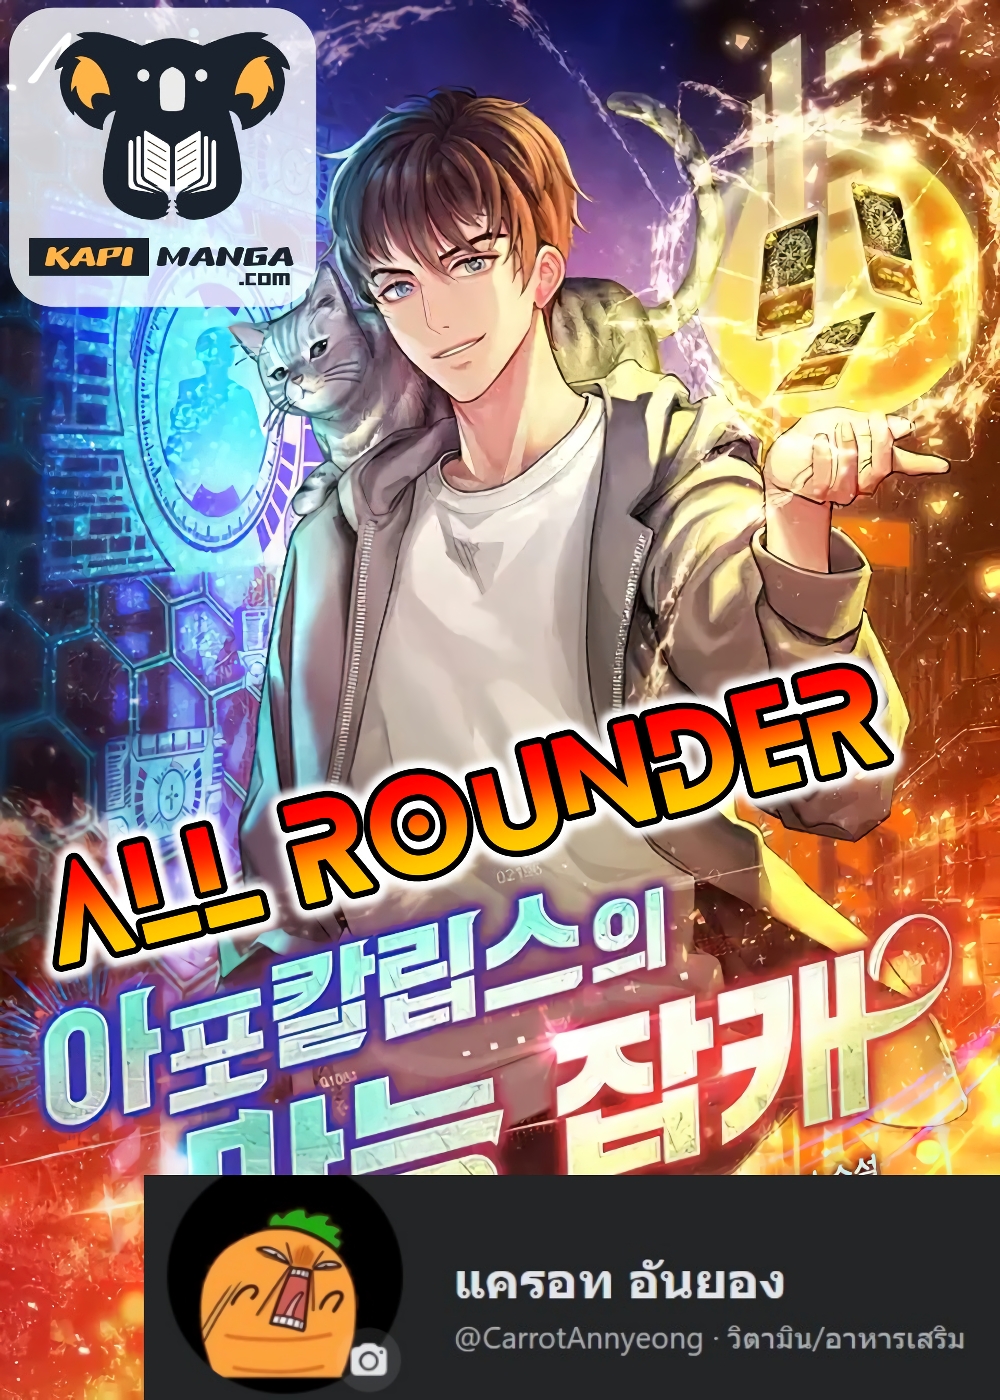 All Rounder 8 (1)